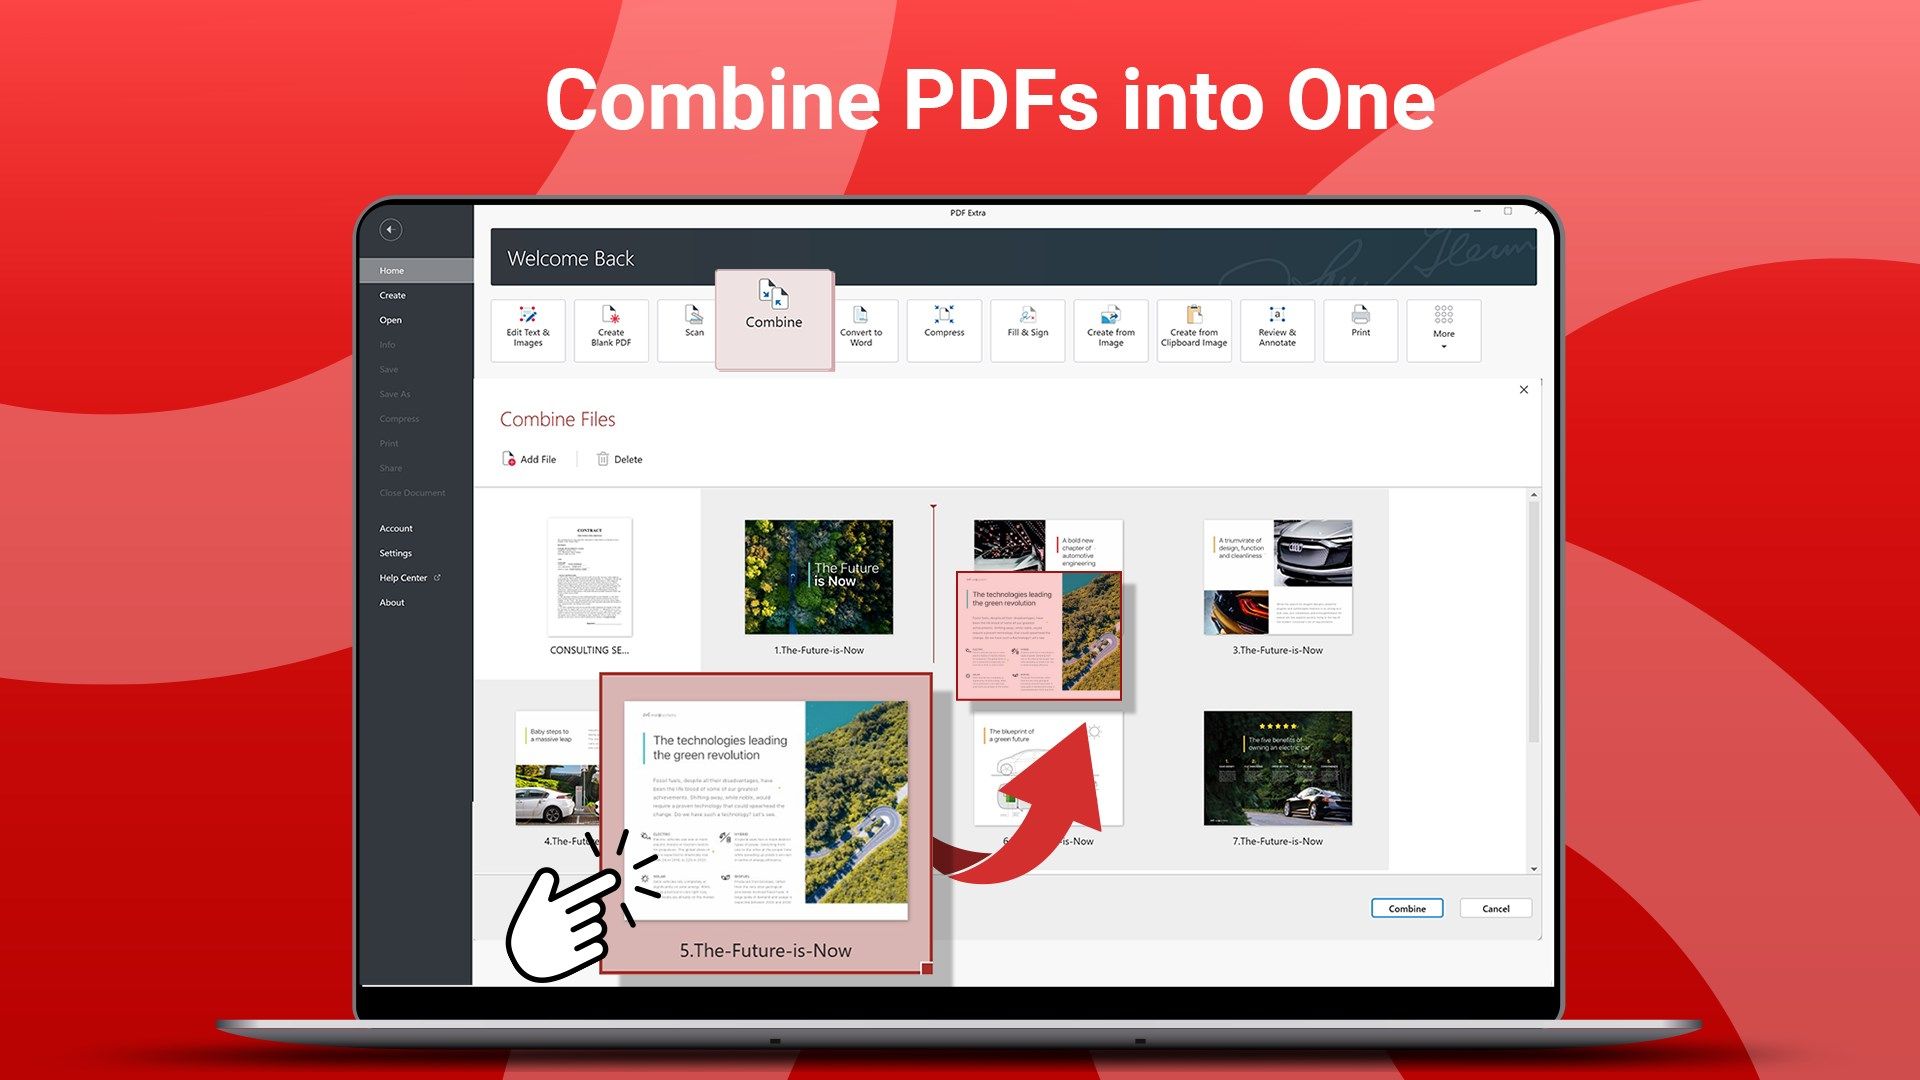 With its simple and practical user interface, PDF Extra is the easiest tool to combine PDF files. Just drag and drop the files you want into the combine tool area. Preview and move entire files to their correct position in the new PDF.